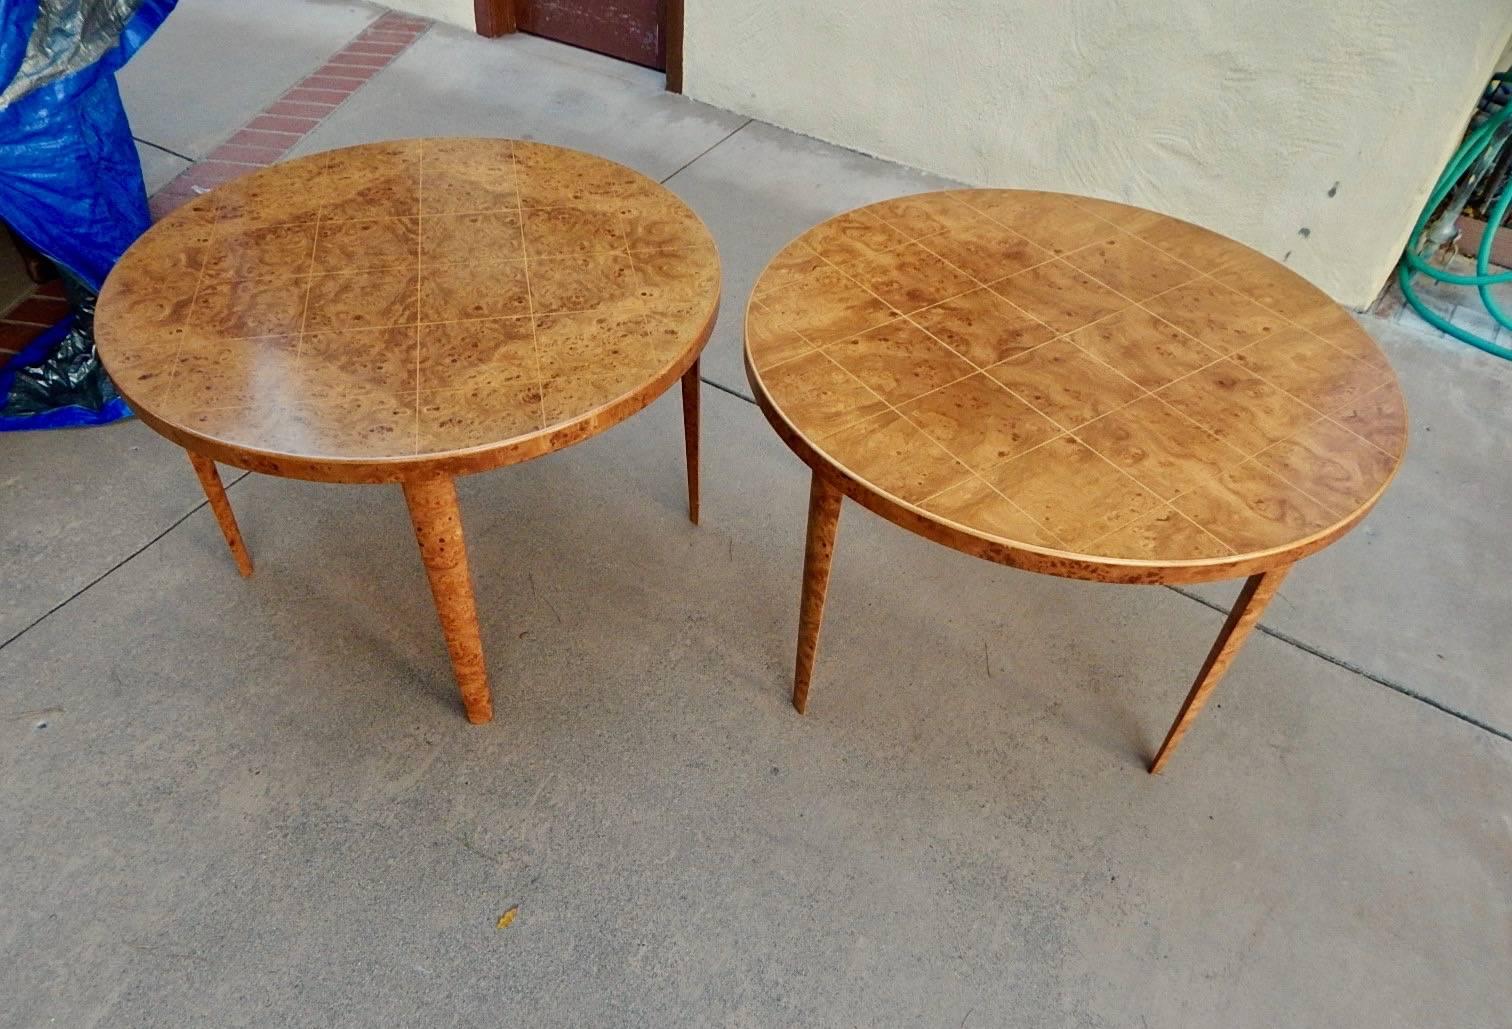 Pair of Side Tables with Grid Pattern Inlay-Nordiskakompaniet, Stockholm, 1947 In Excellent Condition For Sale In Richmond, VA